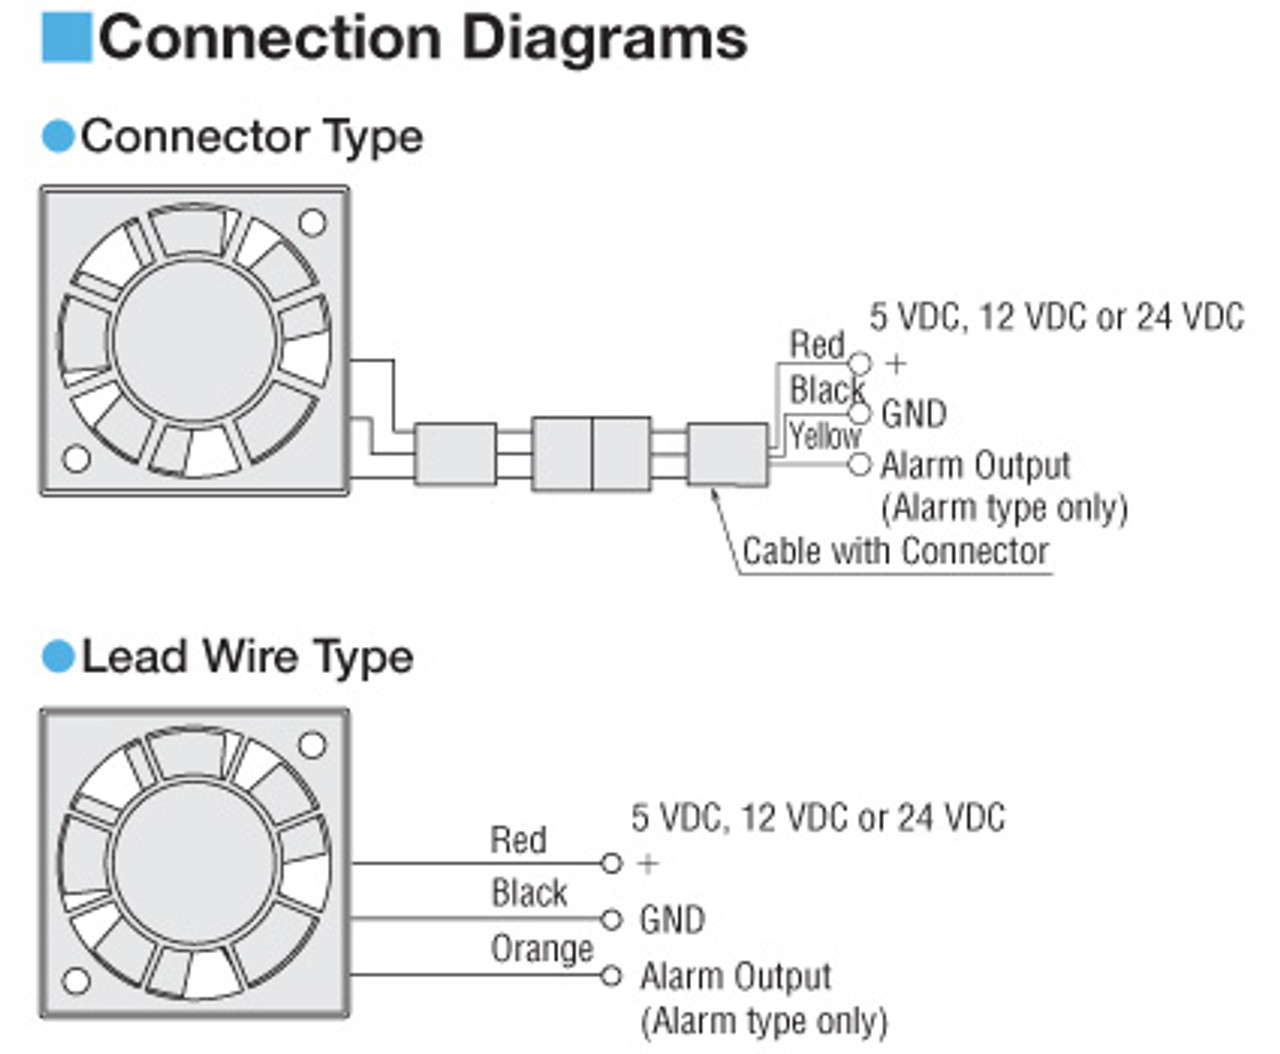 MDS410-12LH - Connection